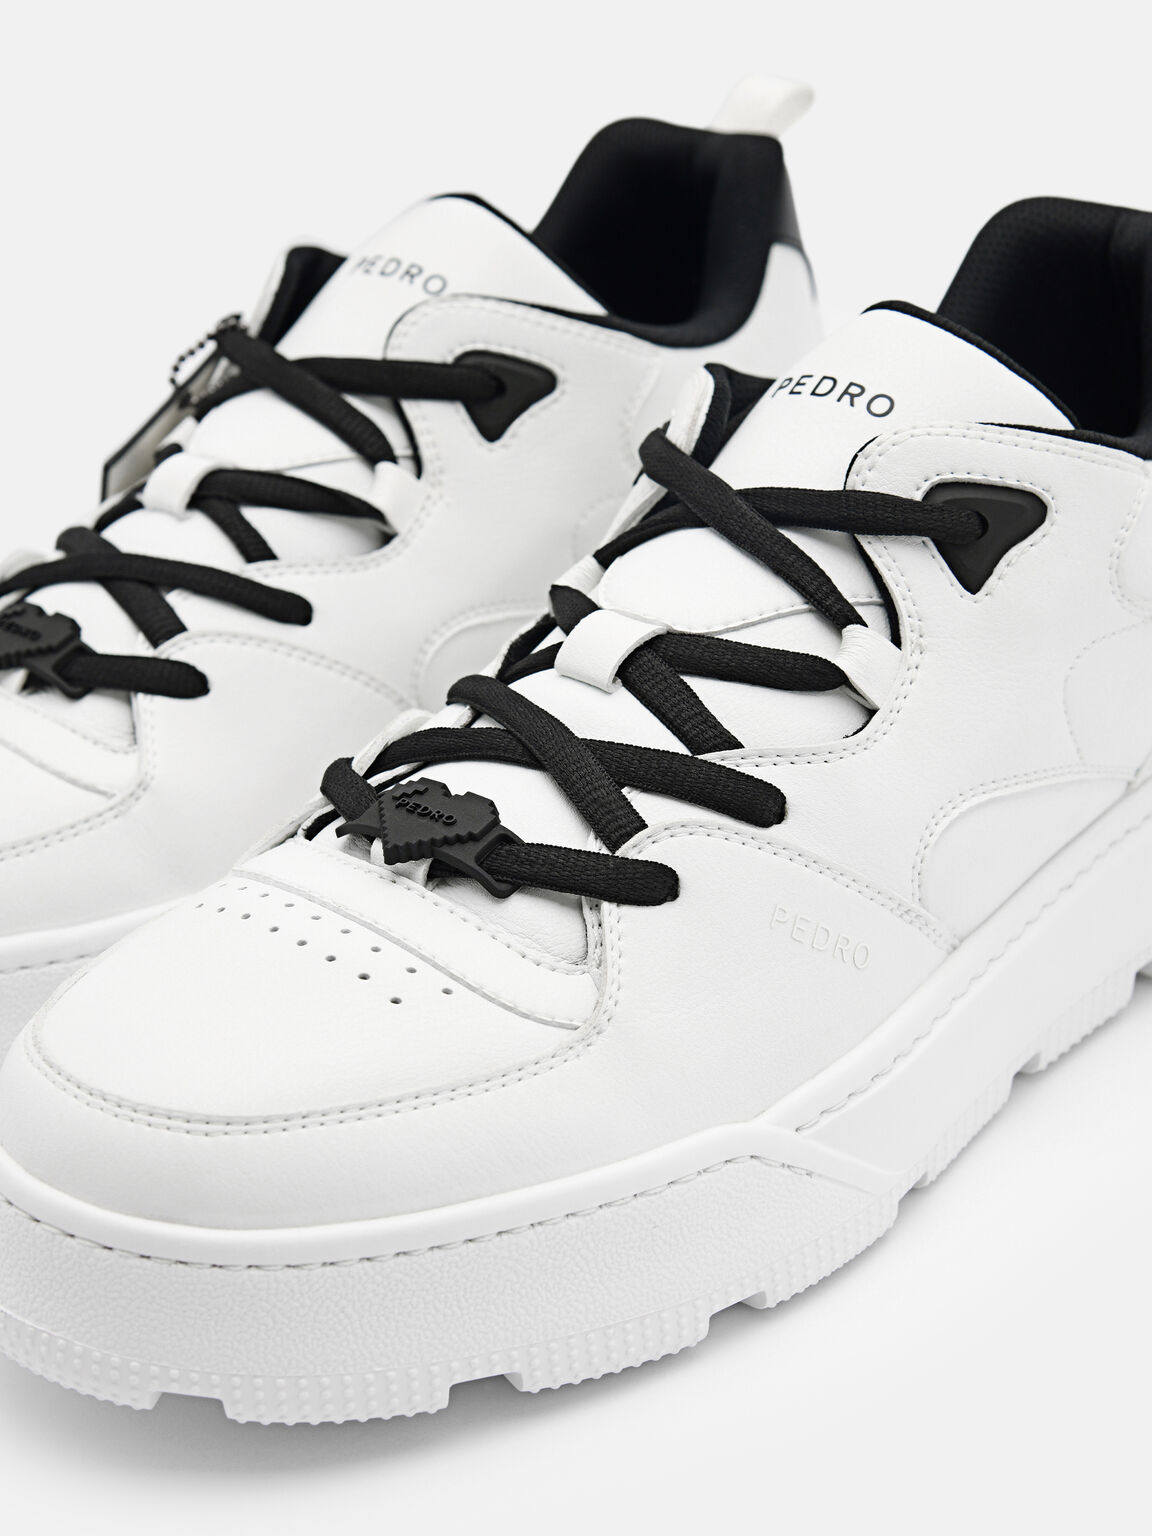 Arc Sneakers, White